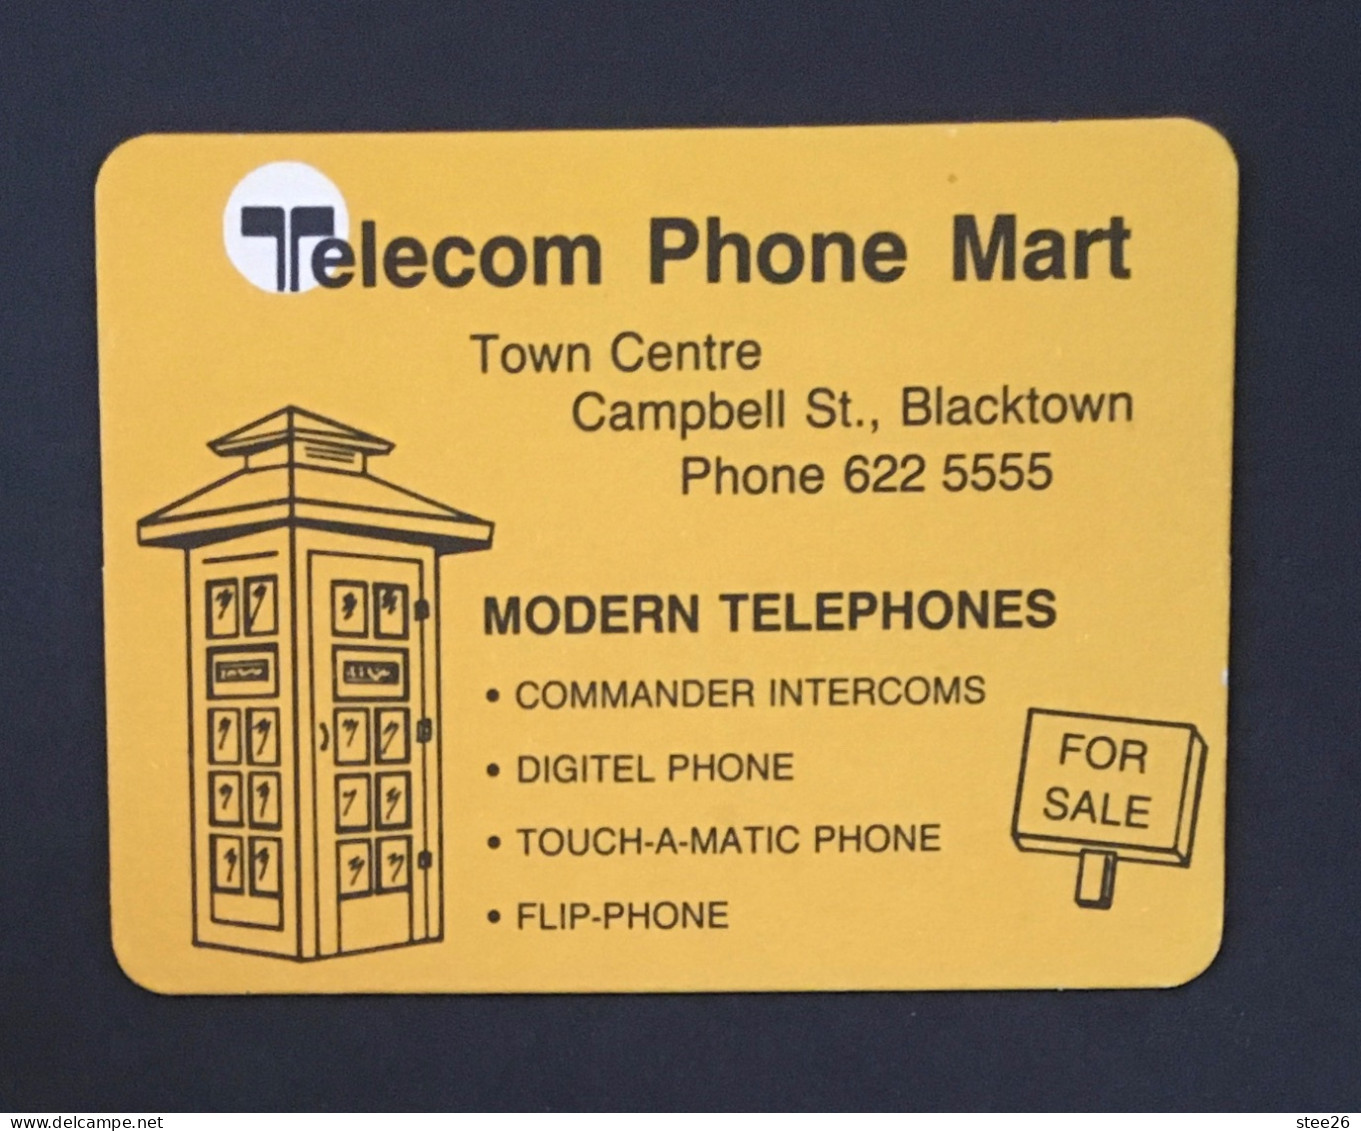 Beer Coaster - Telecom Phone Mart, Blacktown - Sotto-boccale